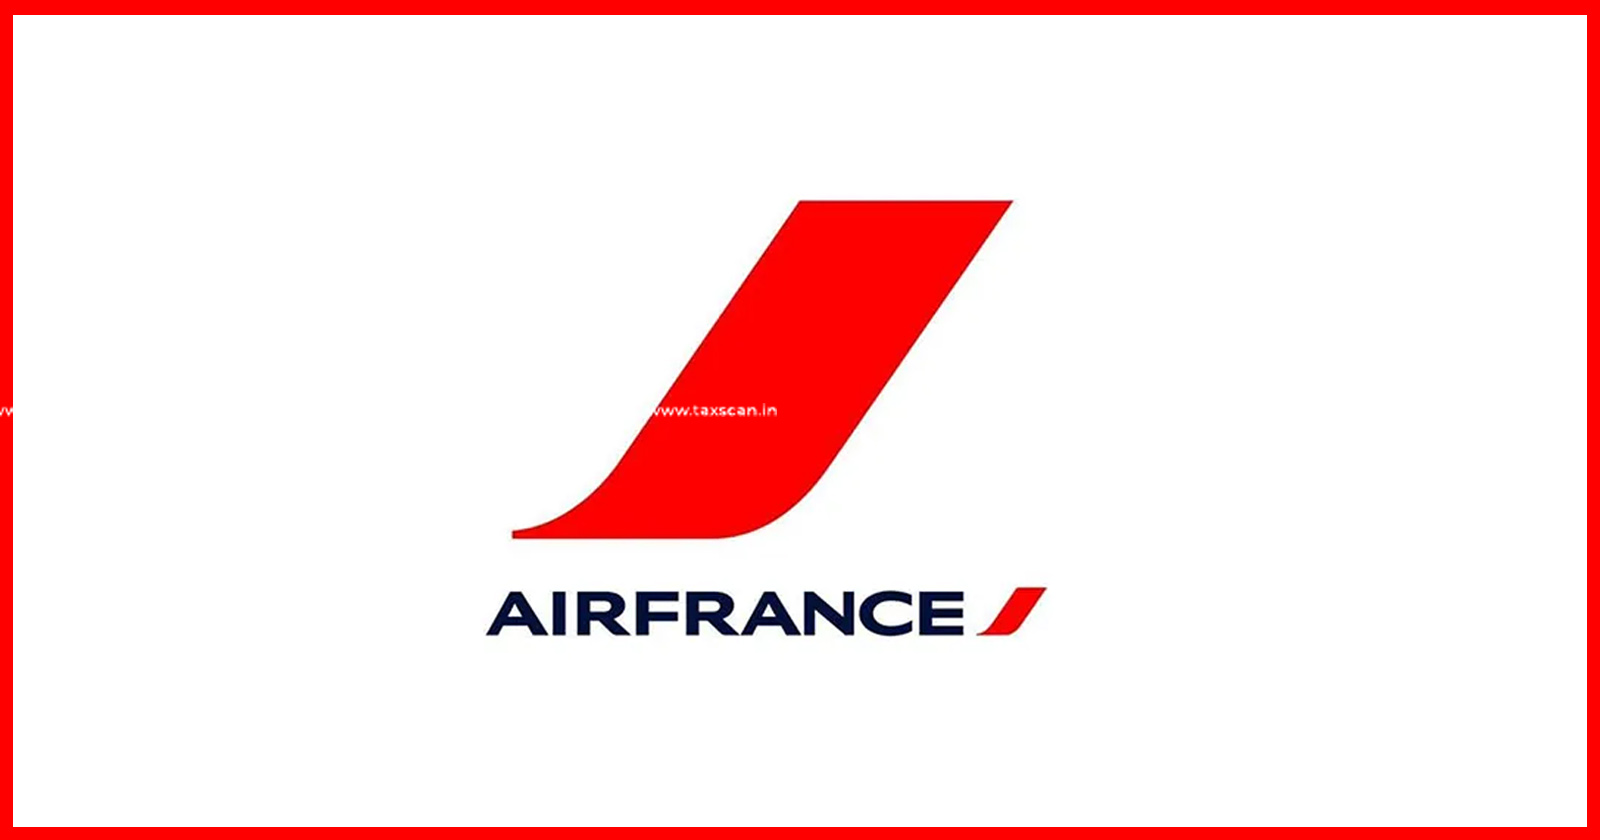 Interest - income - Interest income - Air France - DTAA - taxscan